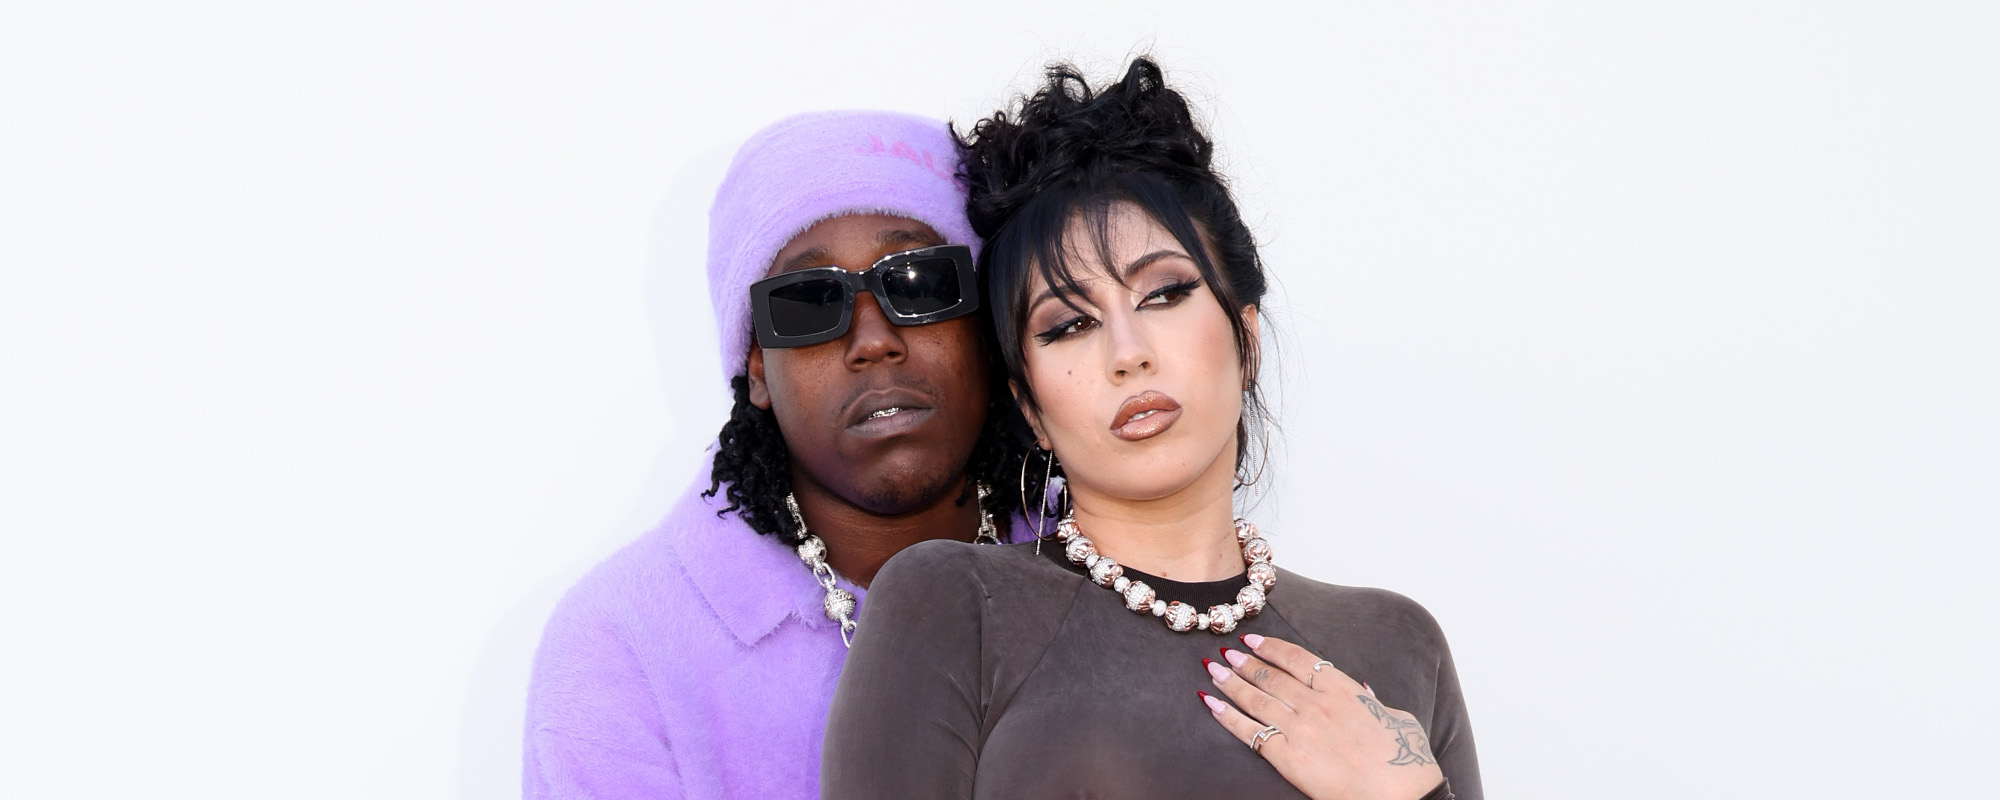 Kali Uchis and Don Toliver: What's the Truth About Their Relationship Status? 13